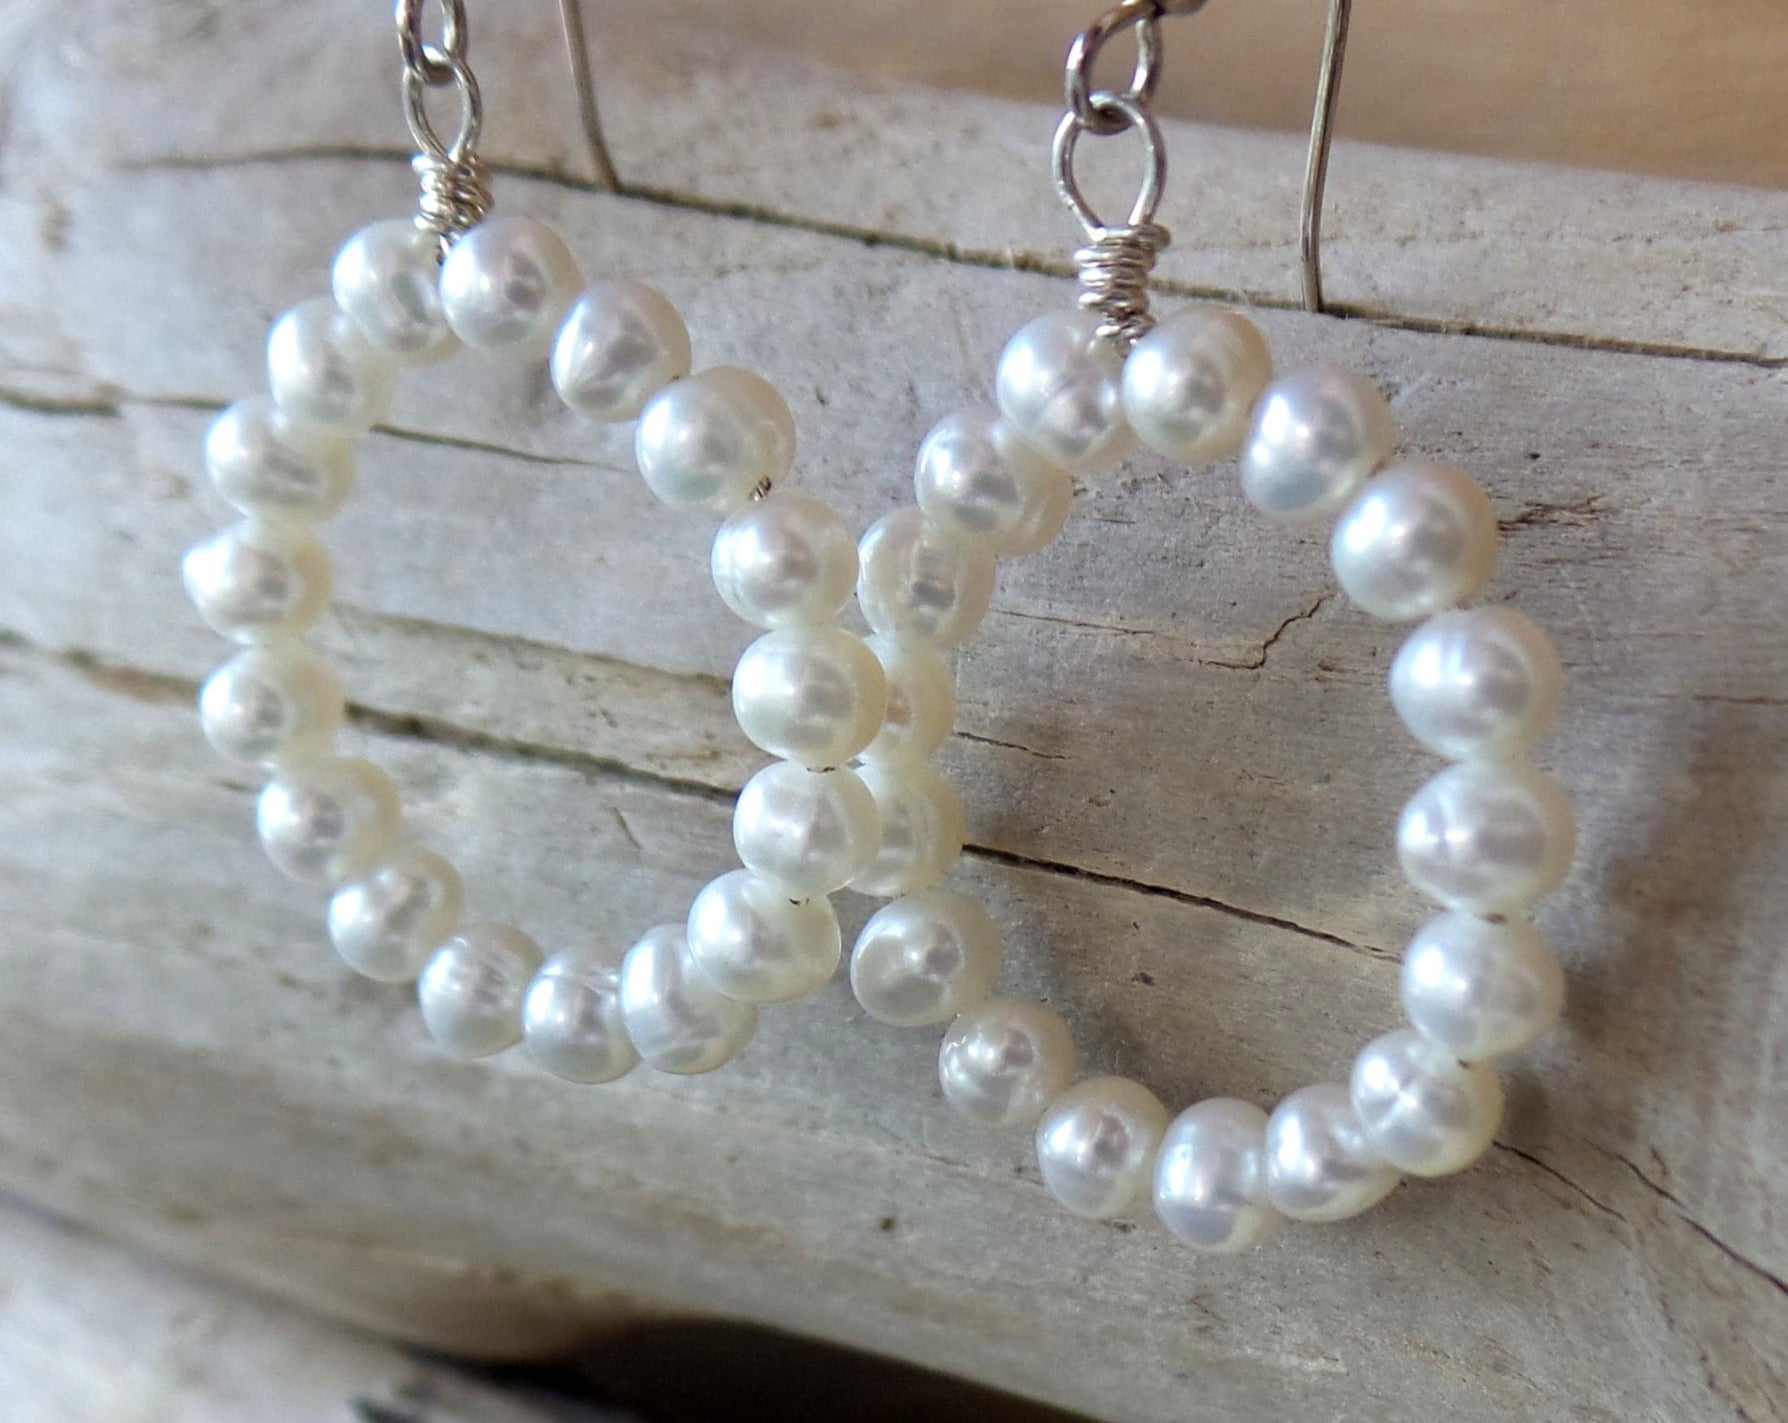 Genuine White Pearl Hoop Earrings made with Sterling Silver & High Quality white Freshwater Cultured Pearls. 